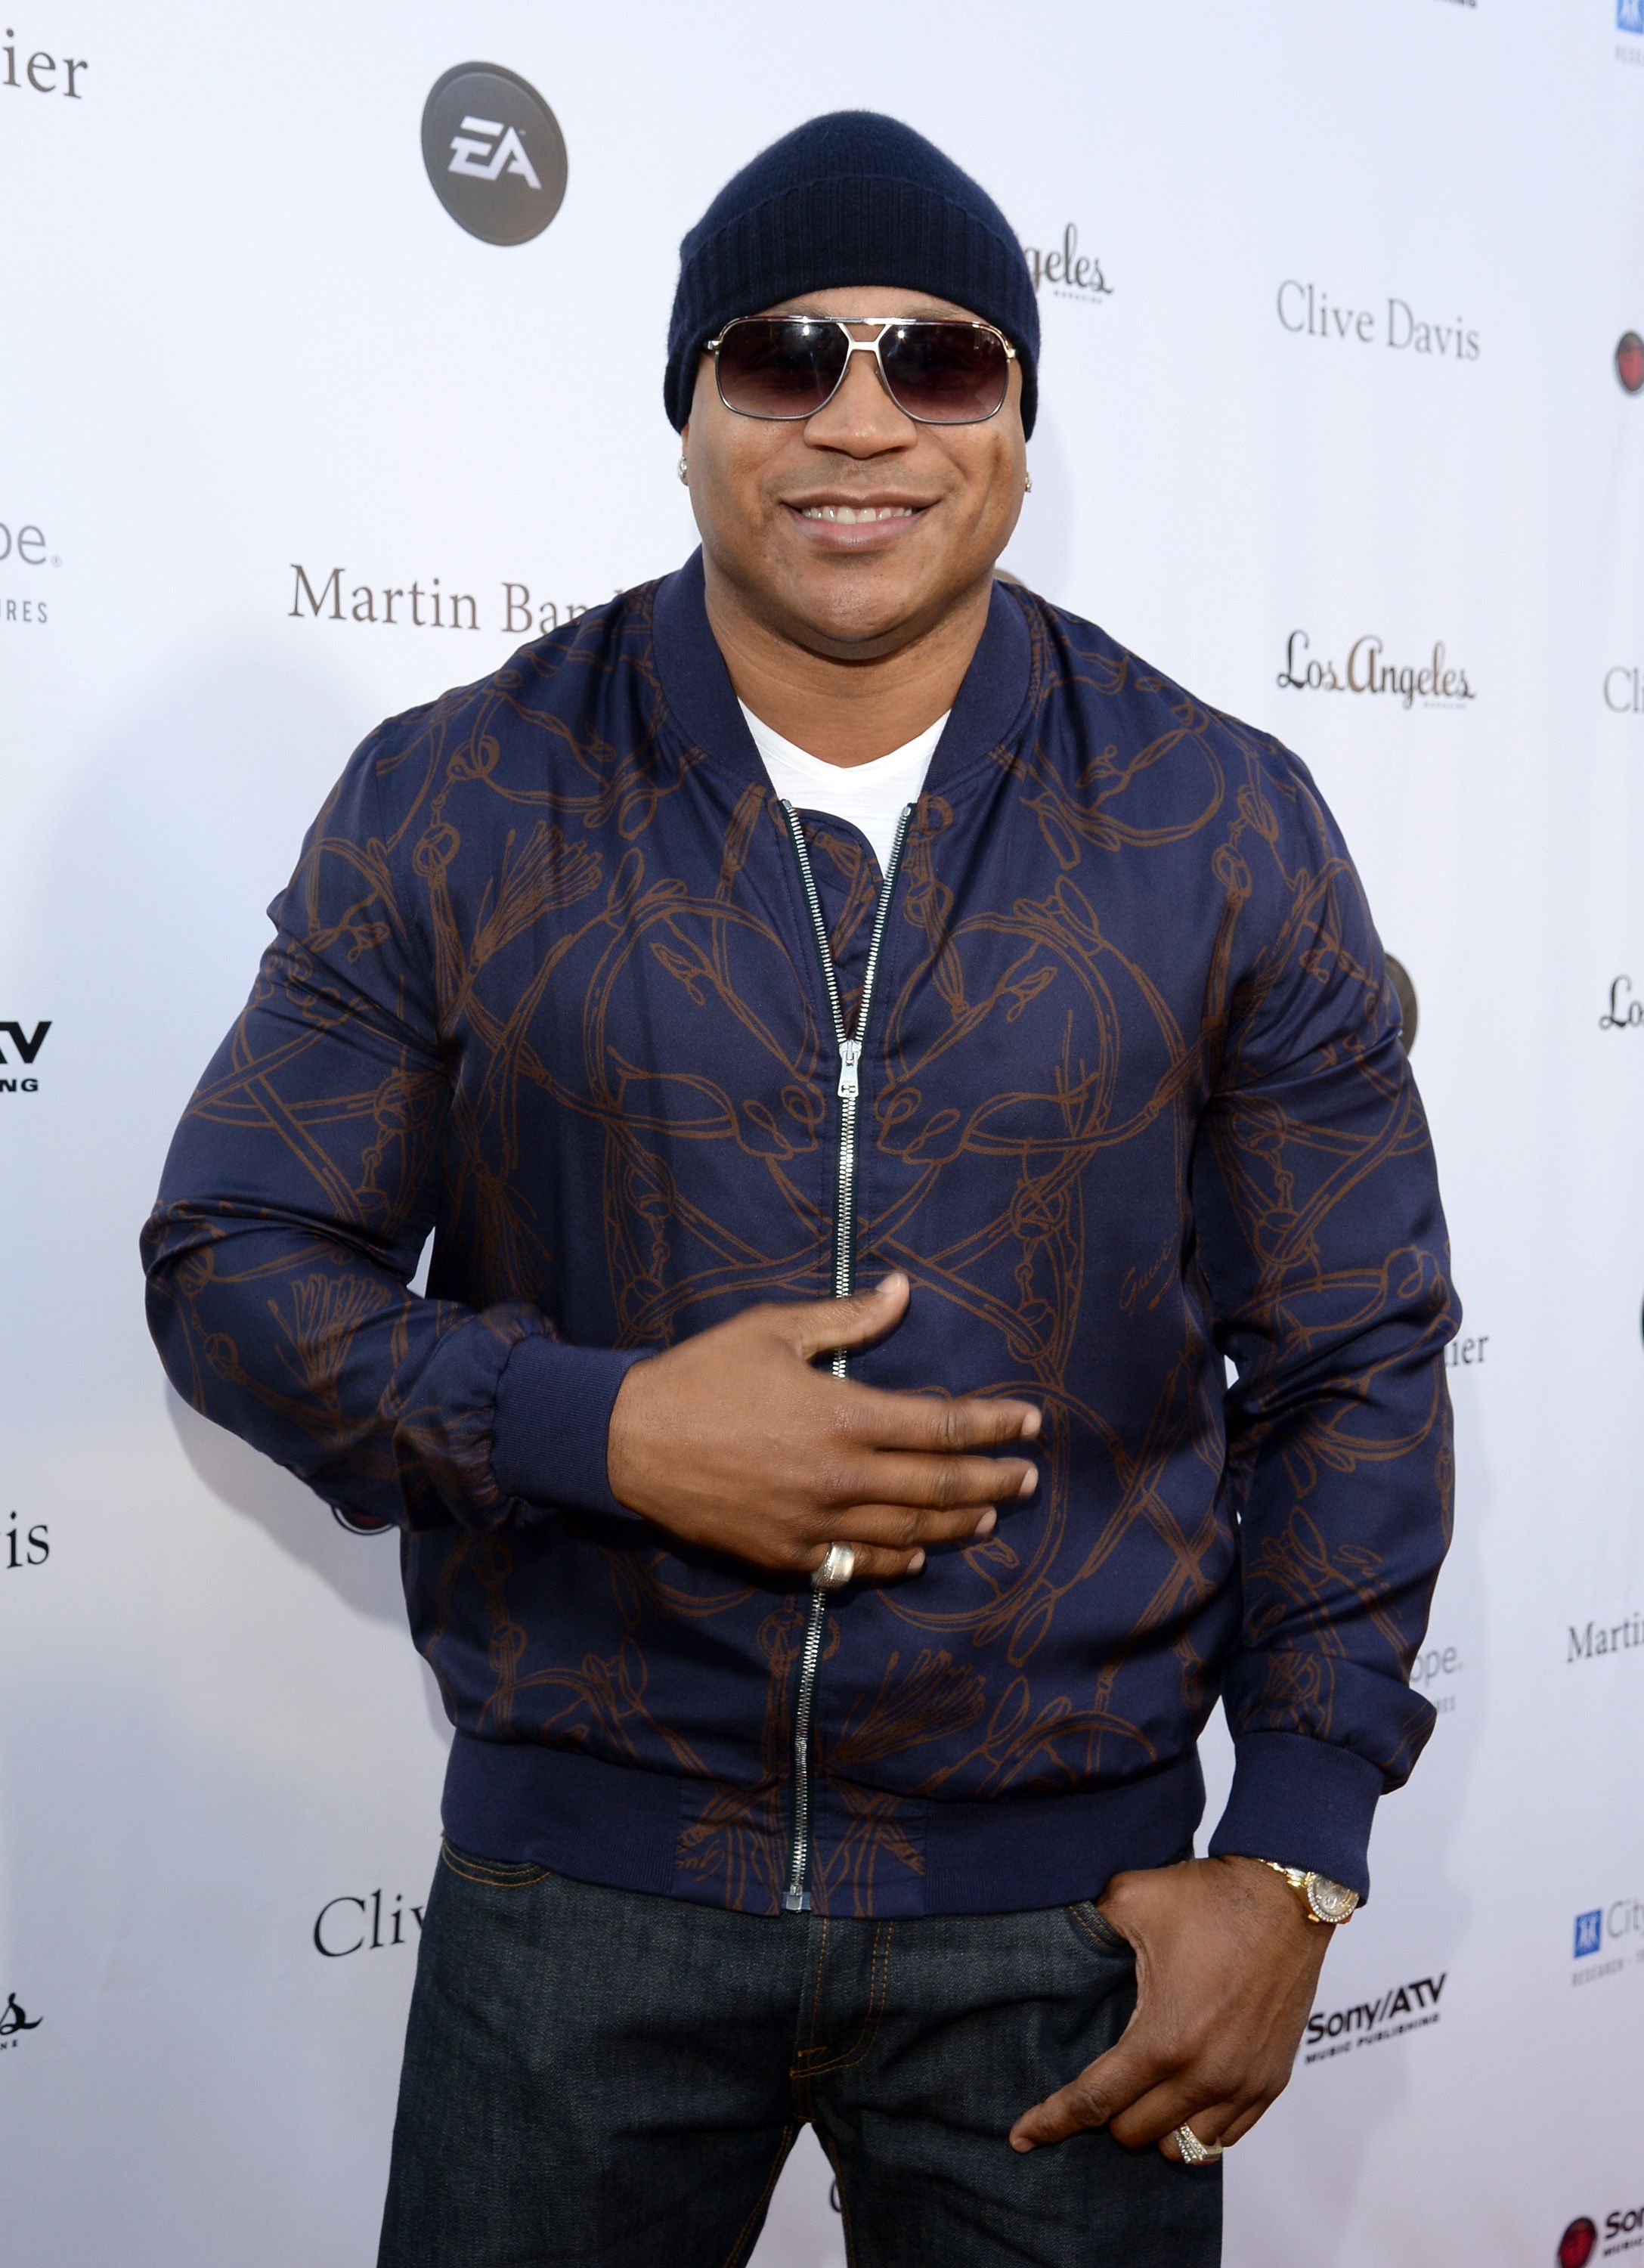  LL Cool J during City Of Hope's 11th Annual "Songs Of Hope" Event on June 11, 2015 in Brentwood, California.  | Source: Getty Images